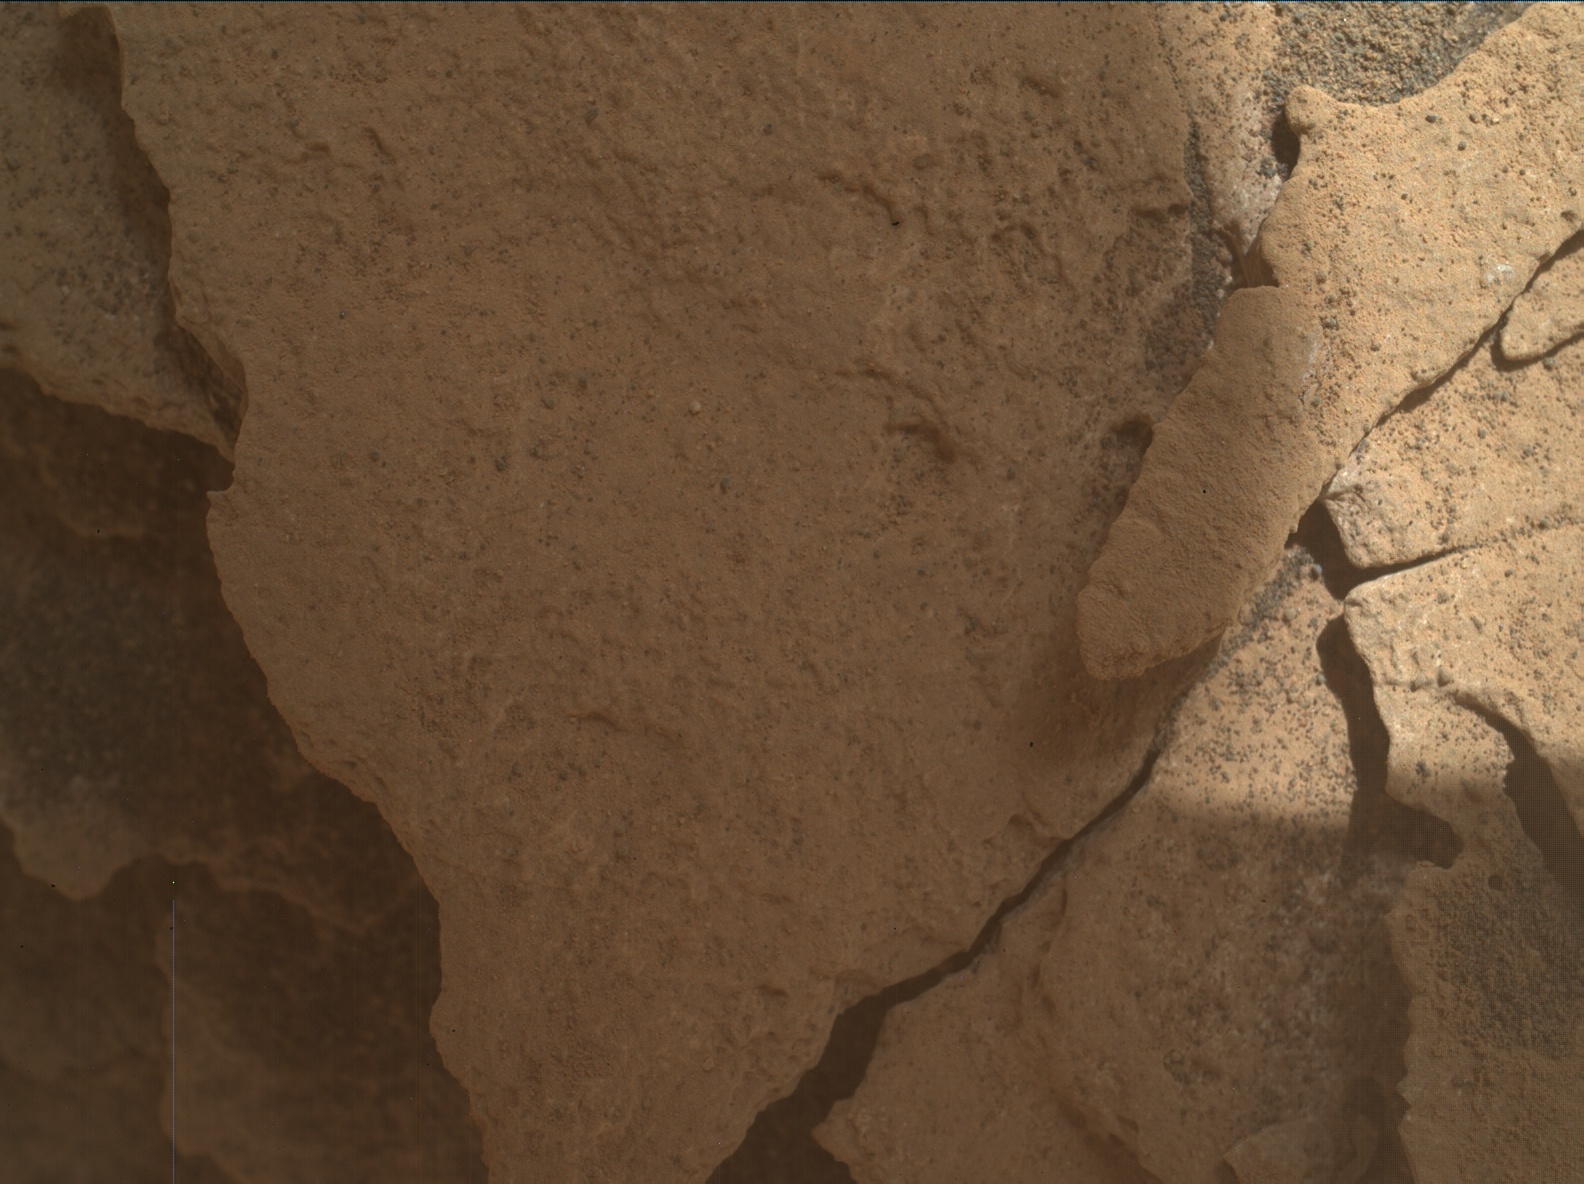 Nasa's Mars rover Curiosity acquired this image using its Mars Hand Lens Imager (MAHLI) on Sol 3278